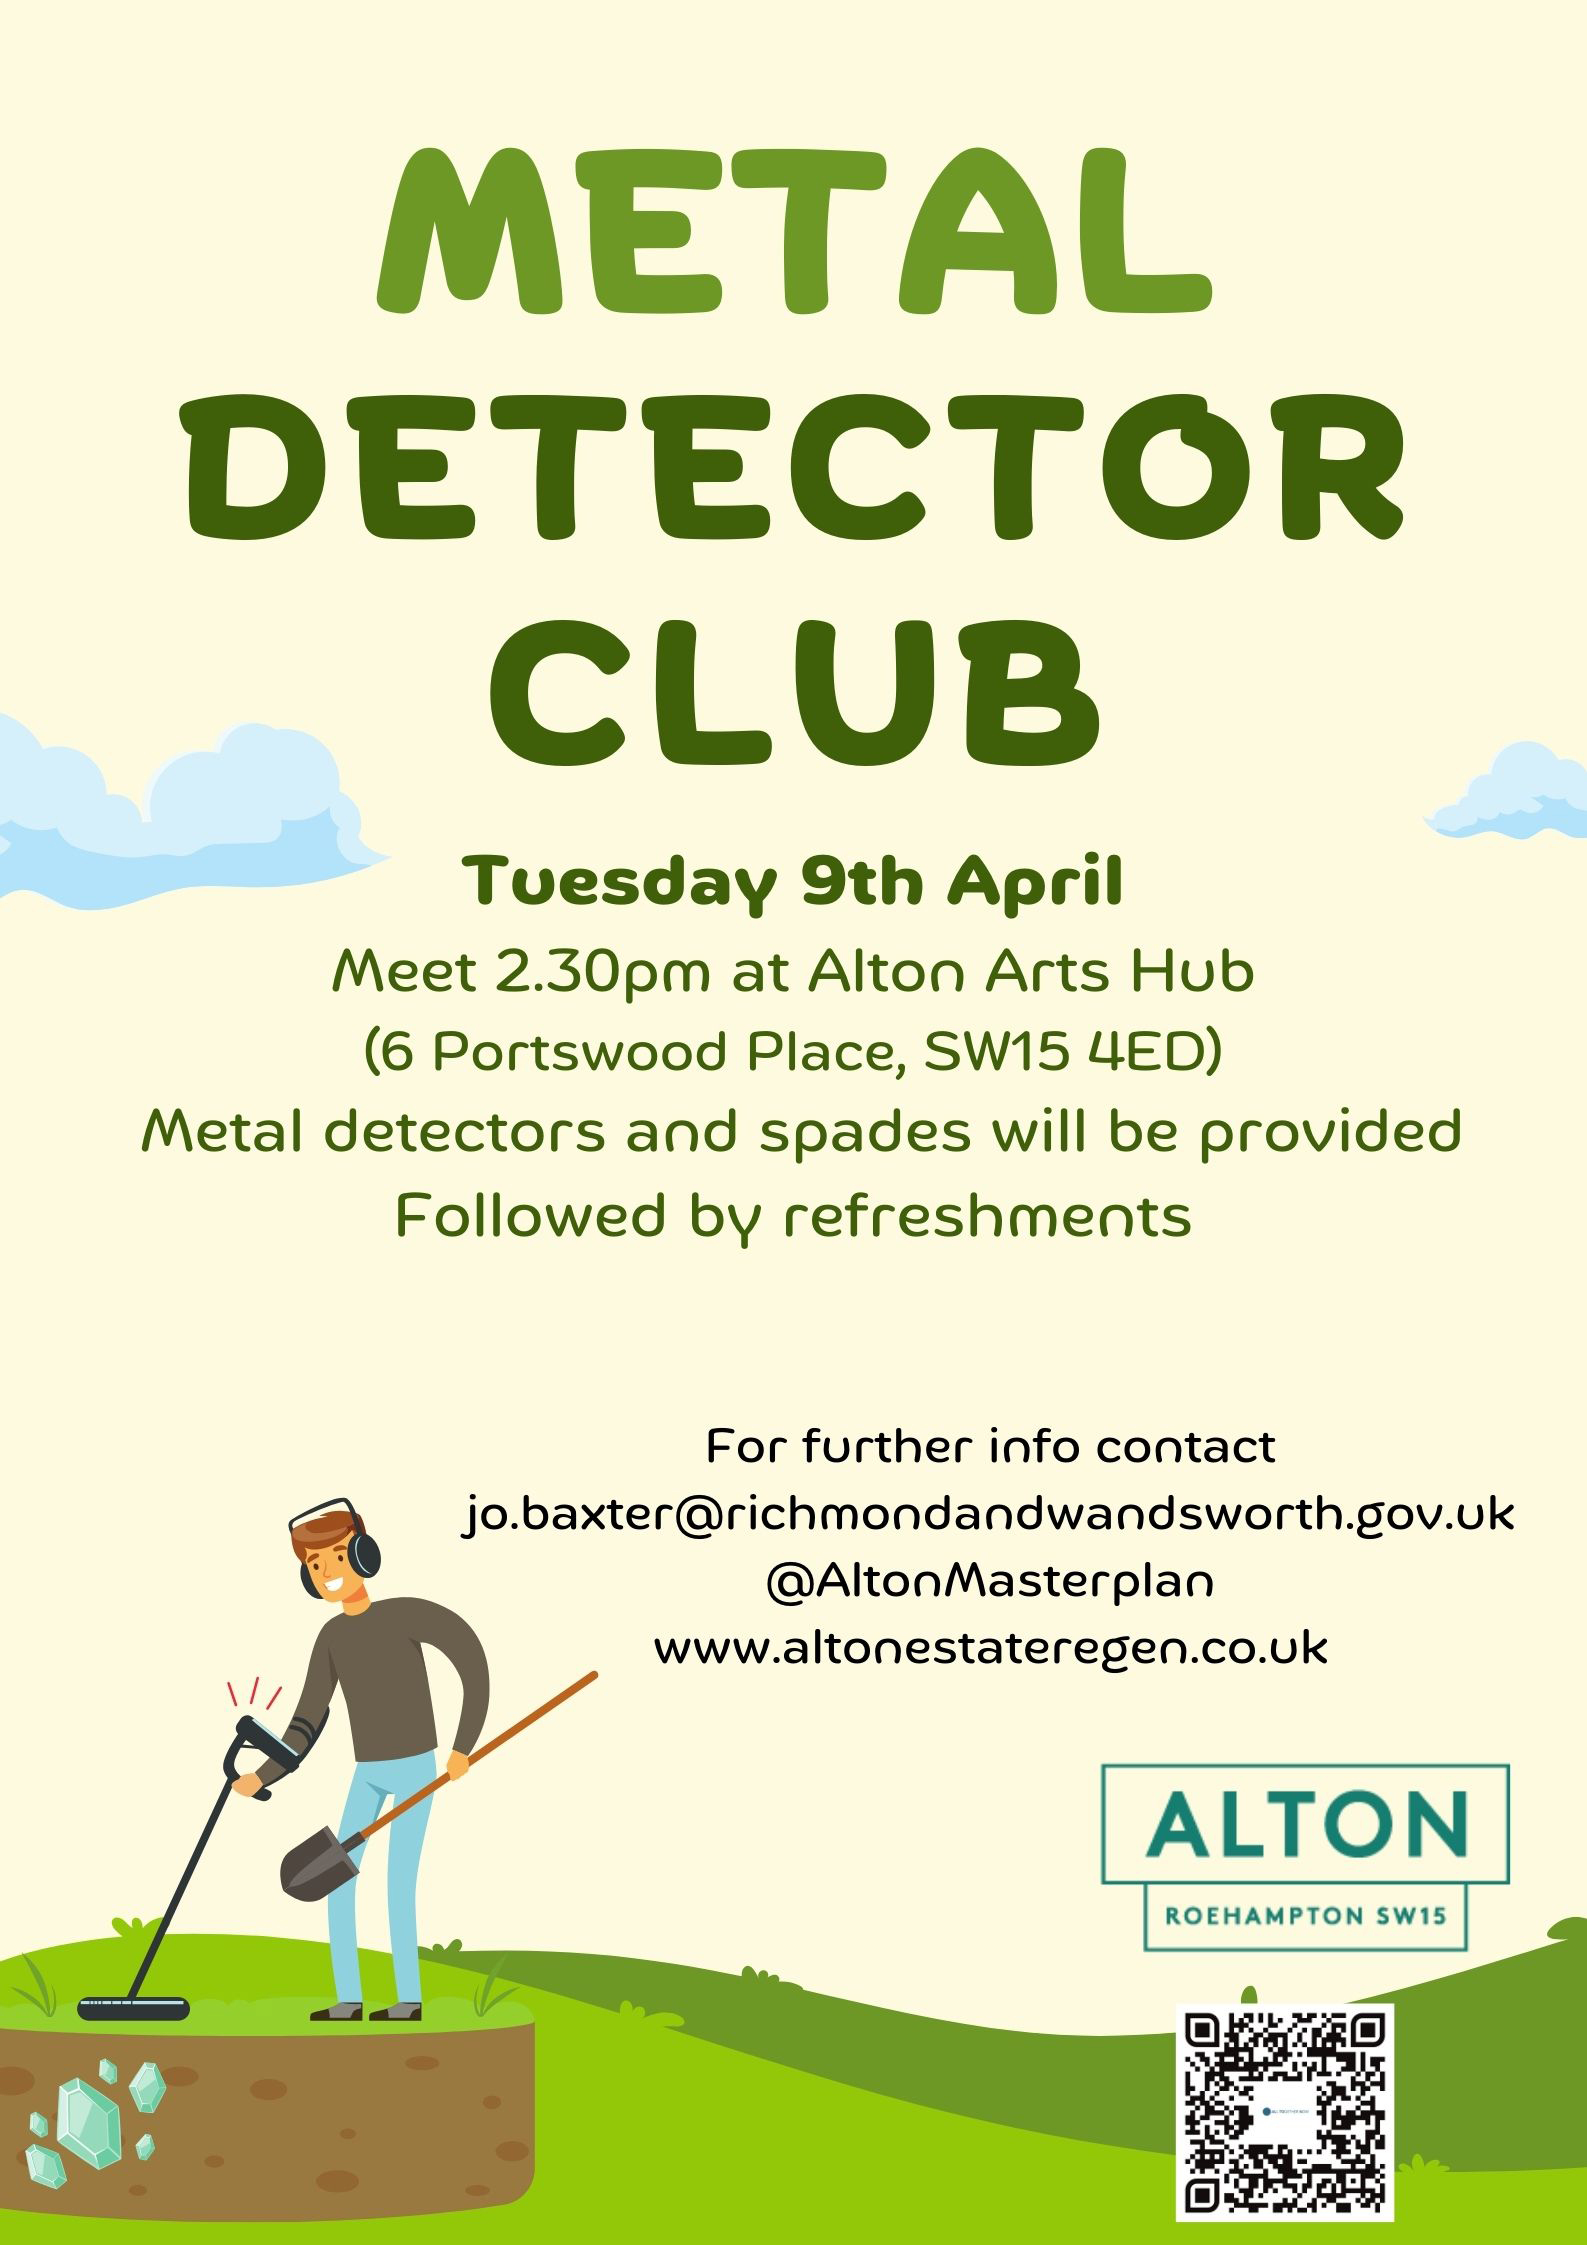 Colourful poster advertising Metal Detector Club, featuring an illustration of someone using a metal detector.